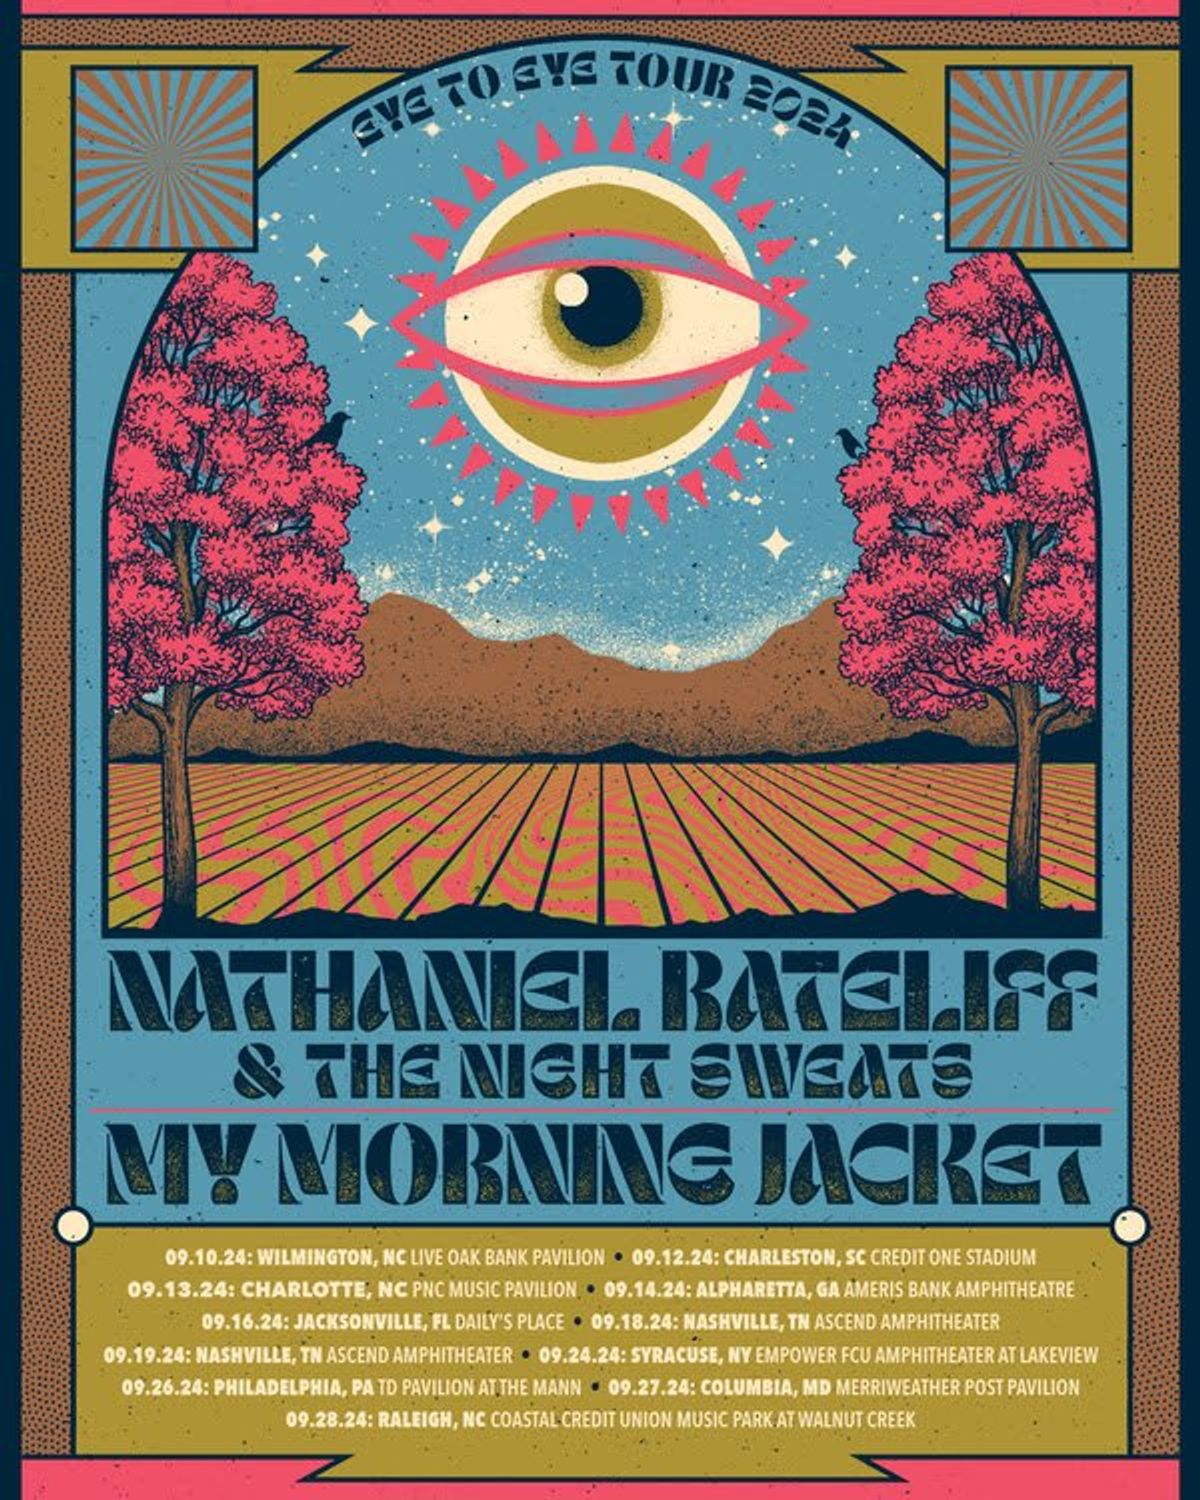 My Morning Jacket and Nathaniel Rateliff & The Night Sweats Announce Tour